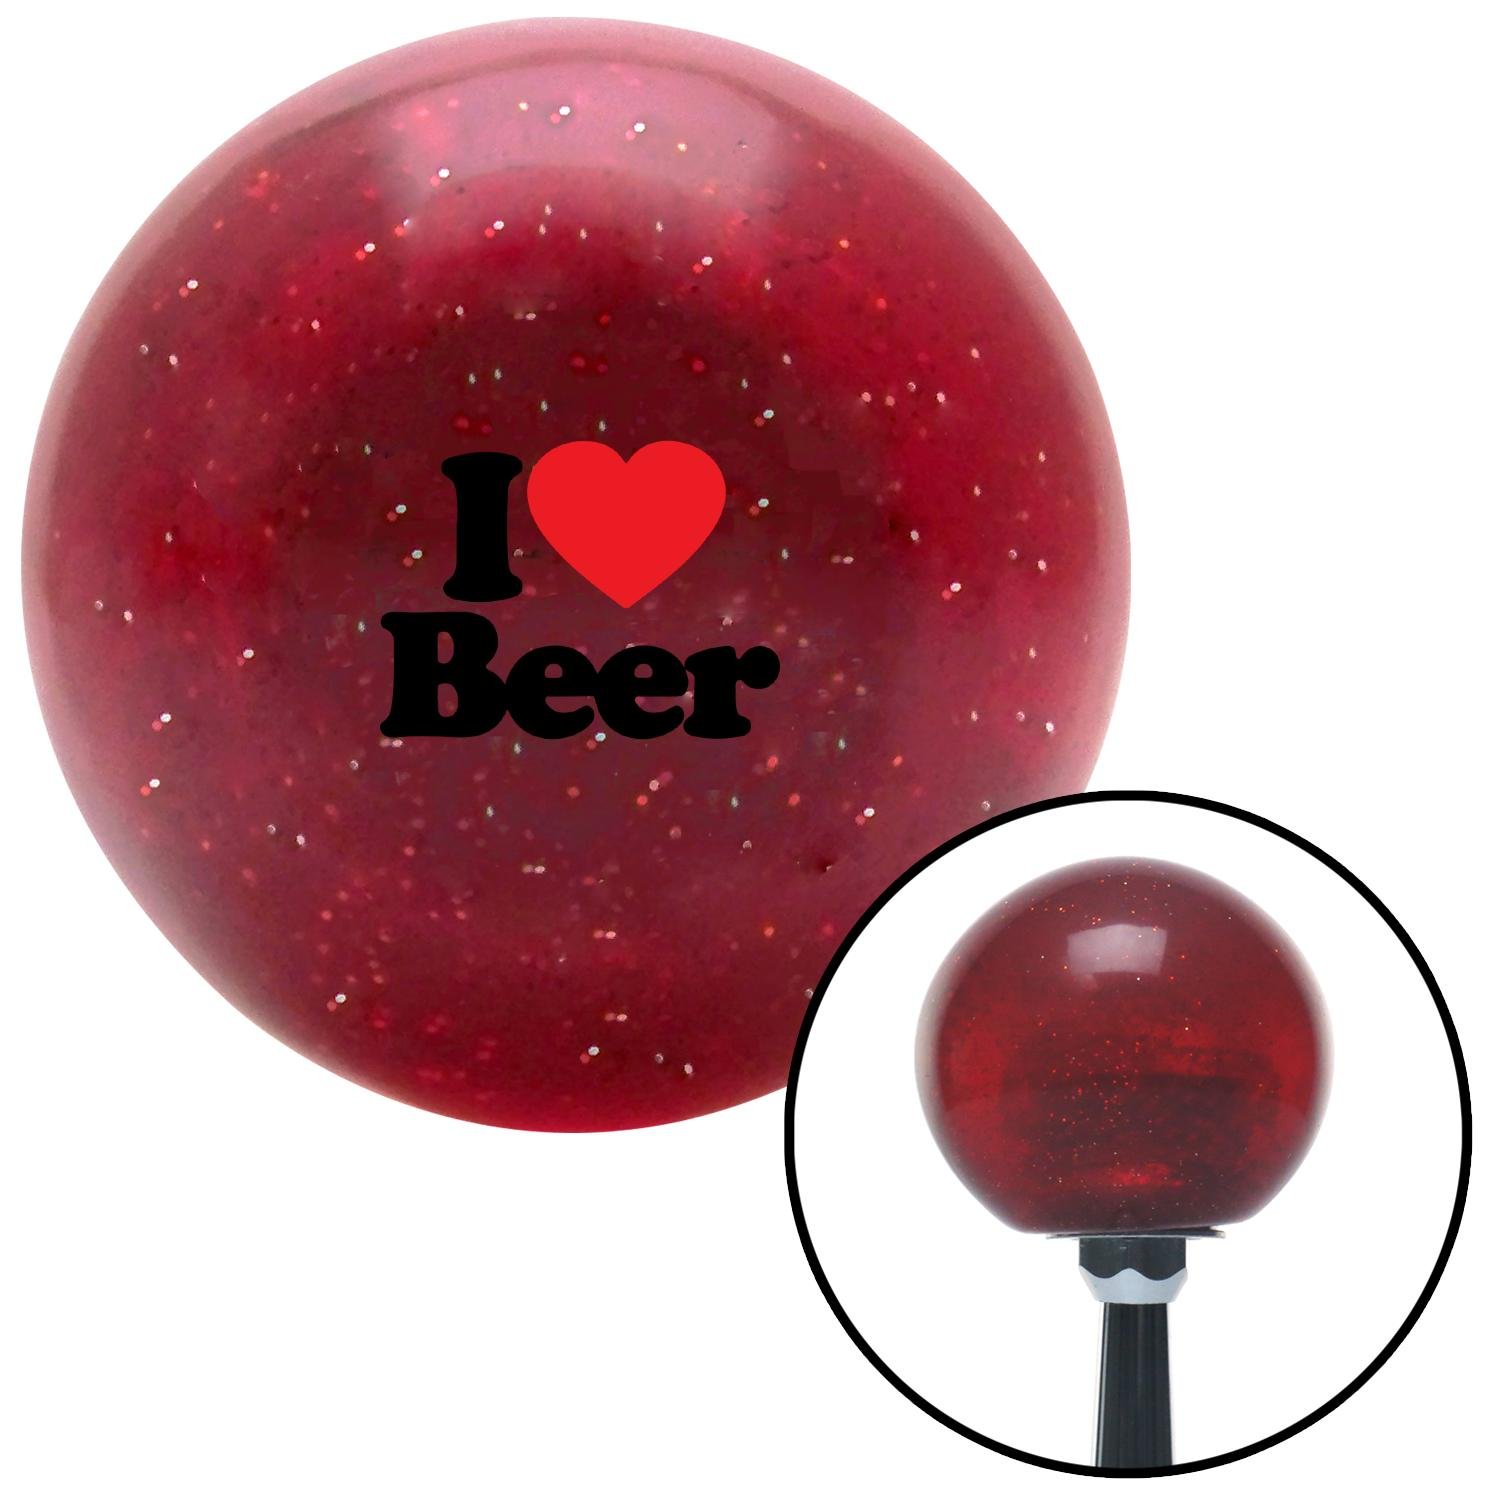 American Shifter 282586 Shift Knob Company I Heart Beer Red Metal Flake with M16 x 1.5 Insert